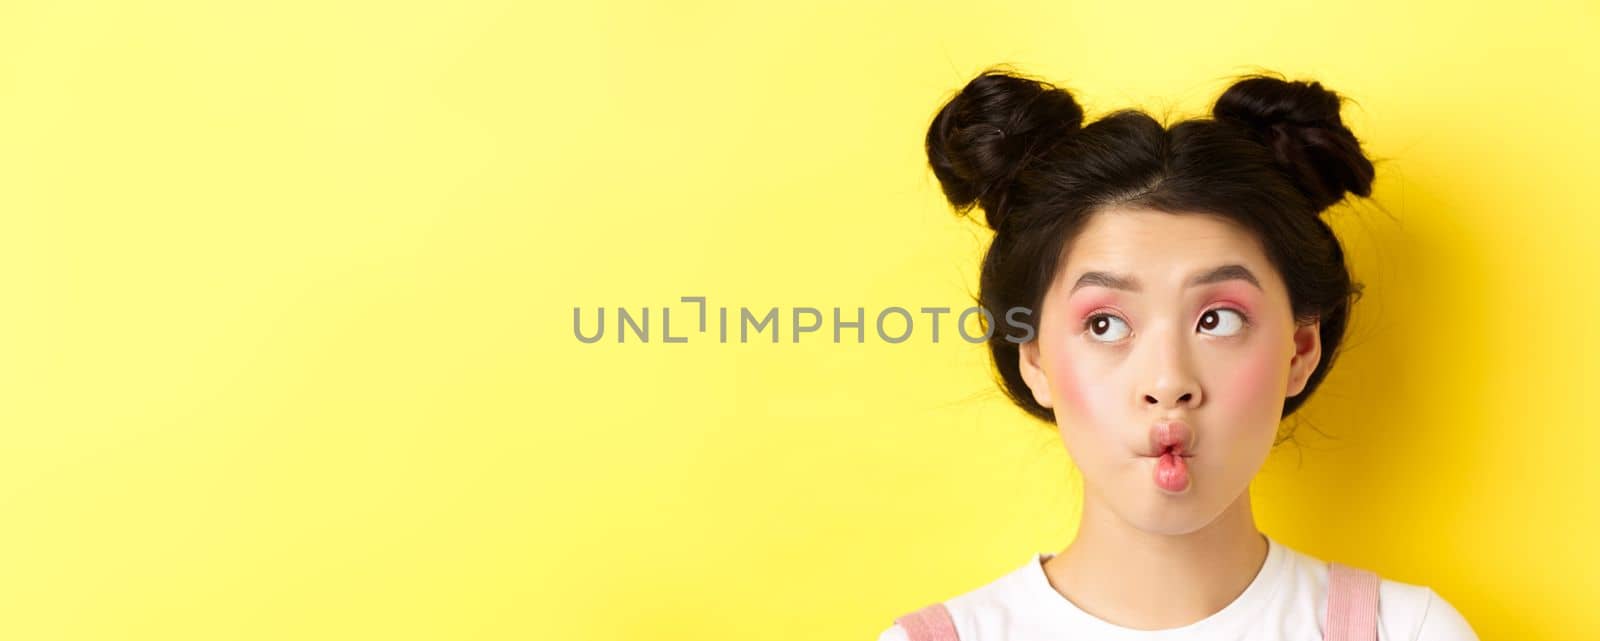 Close-up of teen asian girl pucker lips and looking funny at camera, standing with glamour makeup and stylish hairstyle, yellow background.